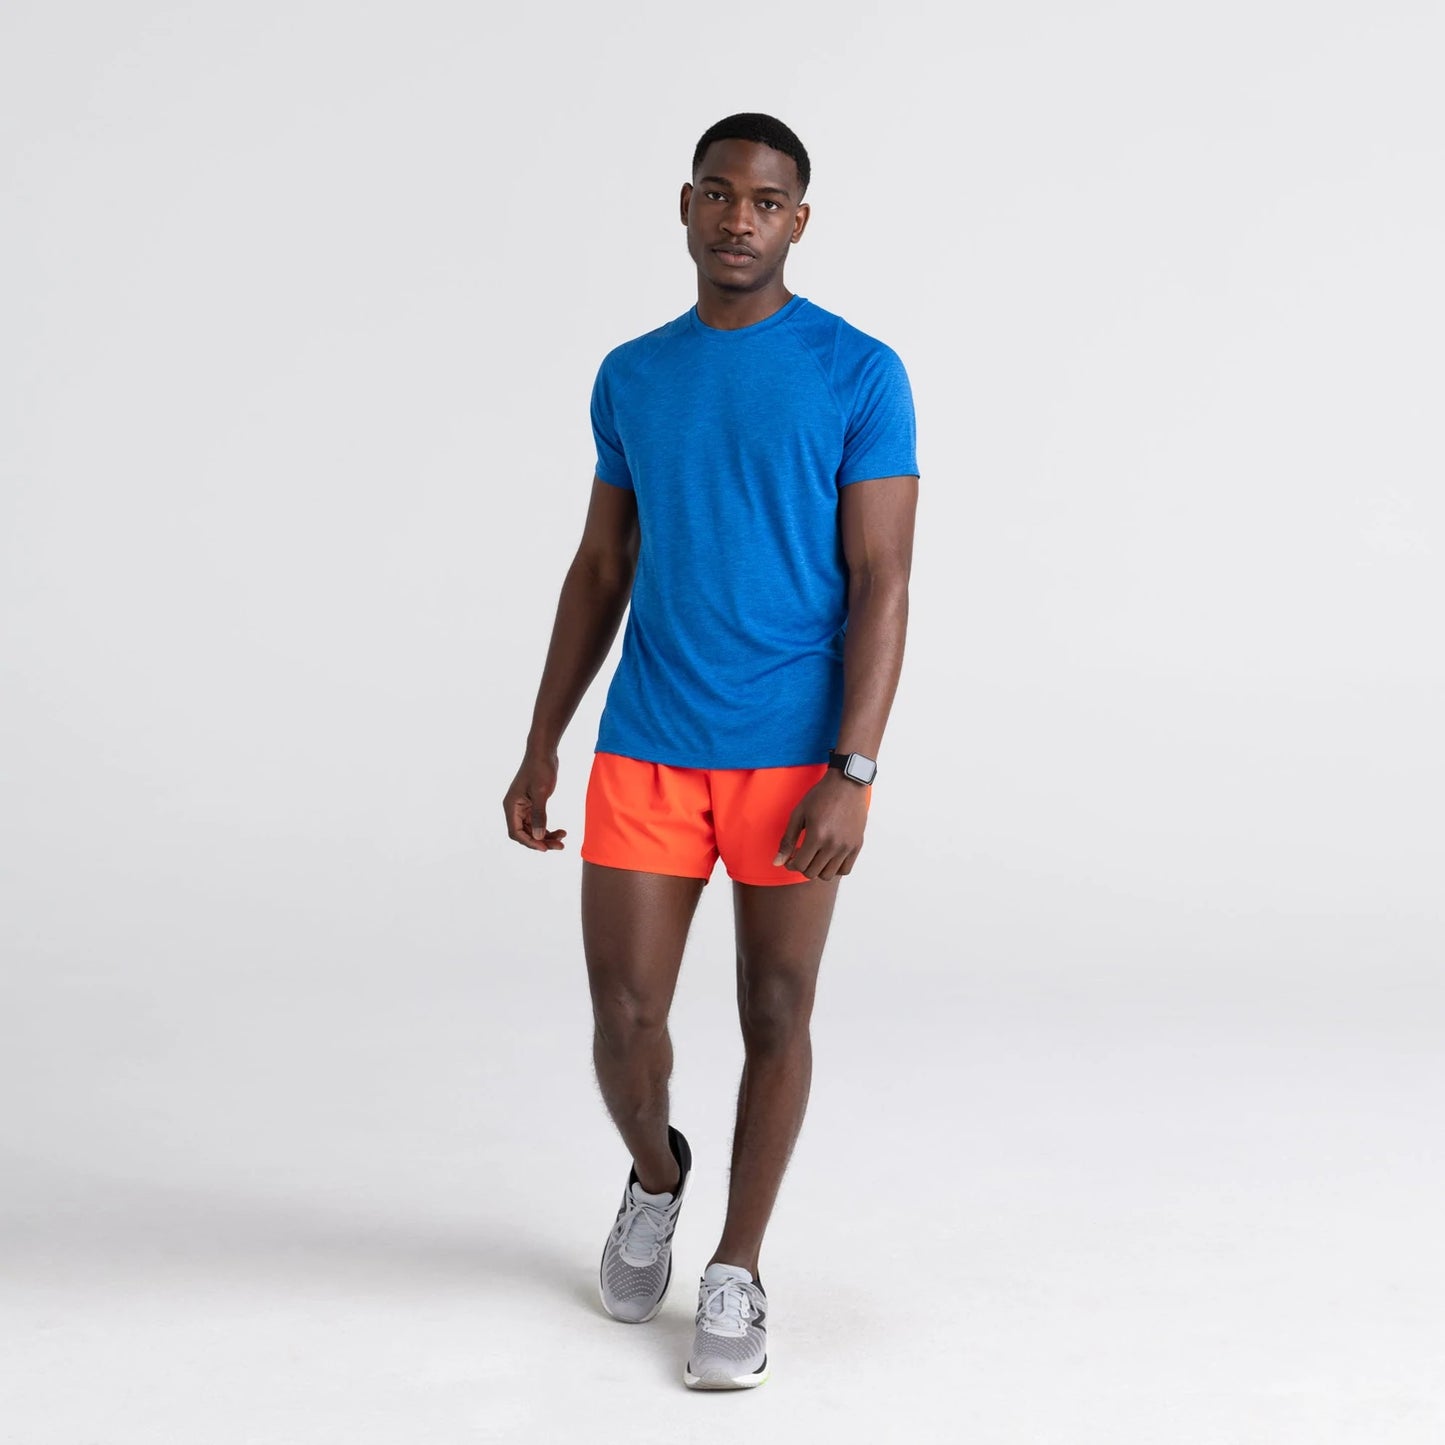 Hightail 2-in-1 Shorts